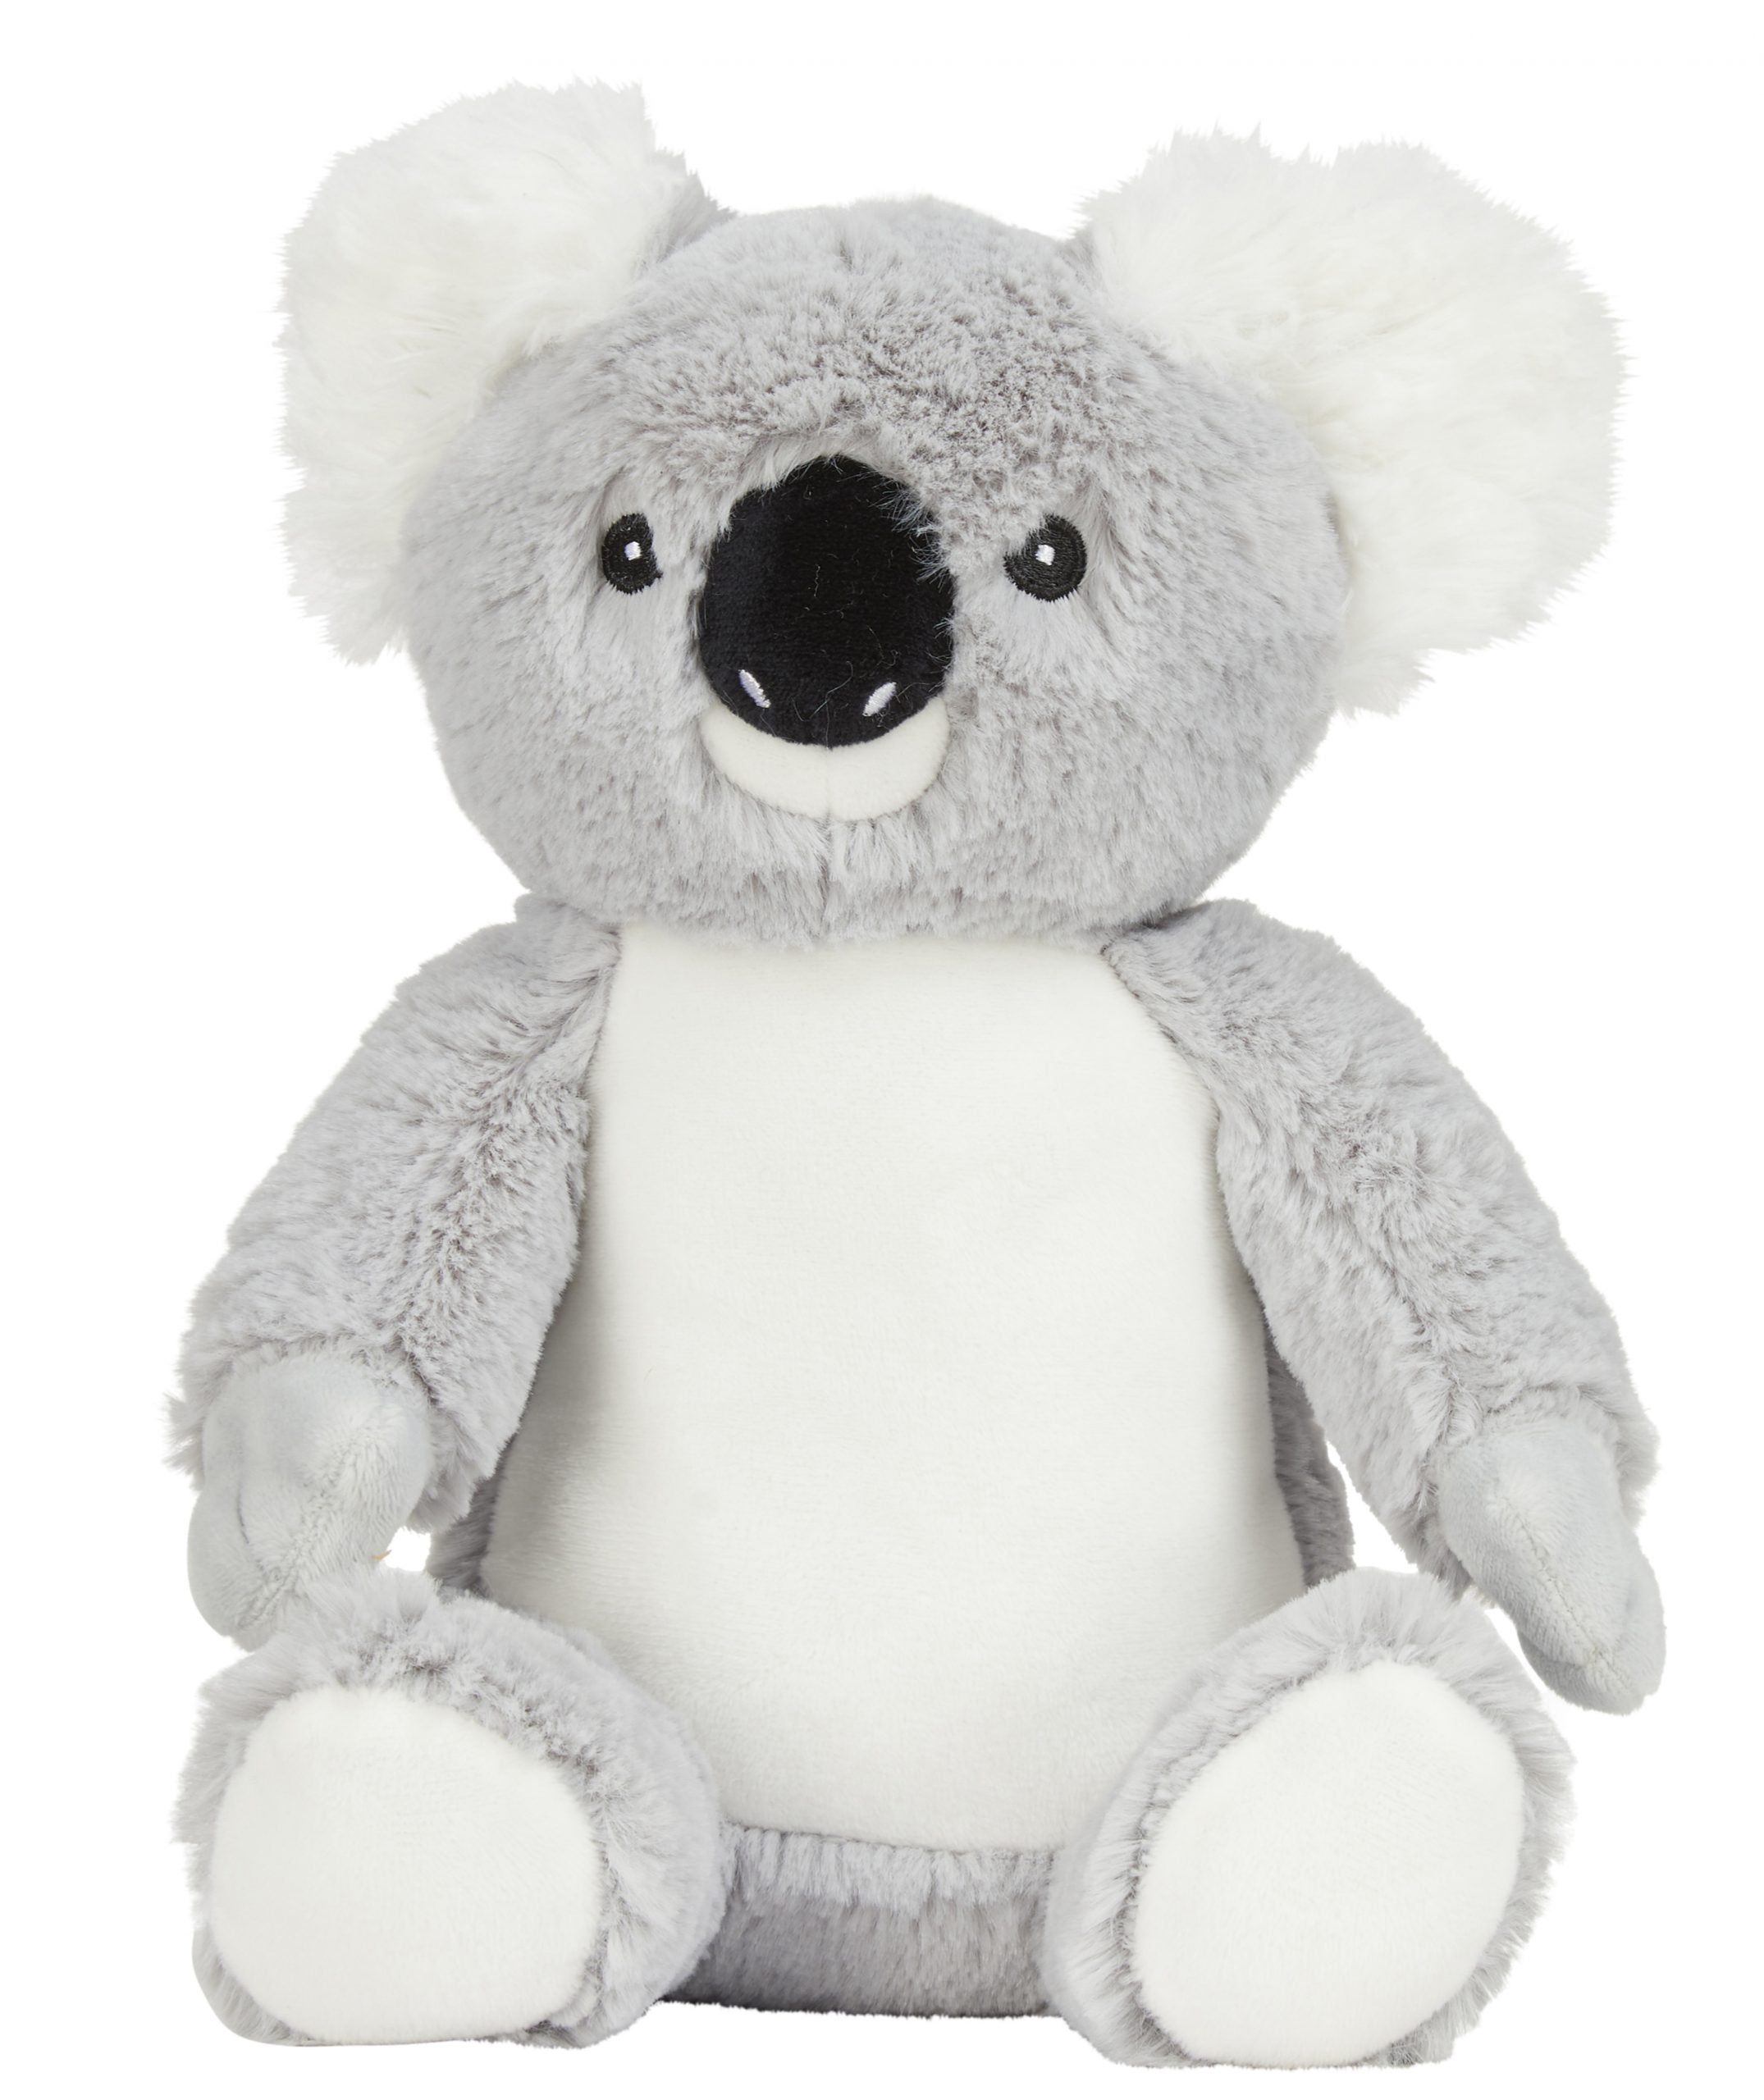 MM060_PRINTME_KOALABEAR_FRONT-scaled